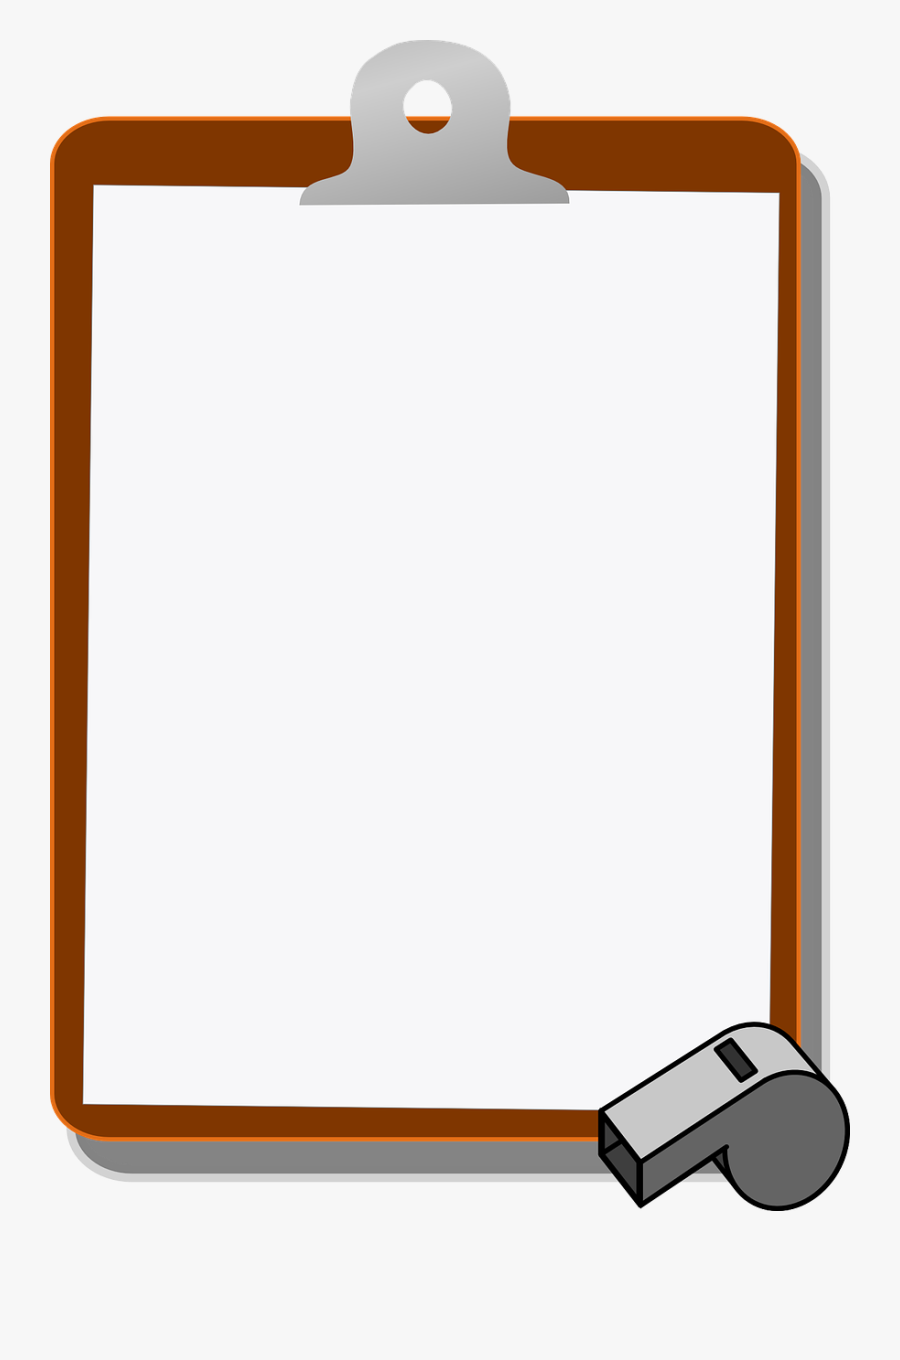 Clipboard Sports Whistle Free Picture - Clipboard And Whistle Clip Art, Transparent Clipart